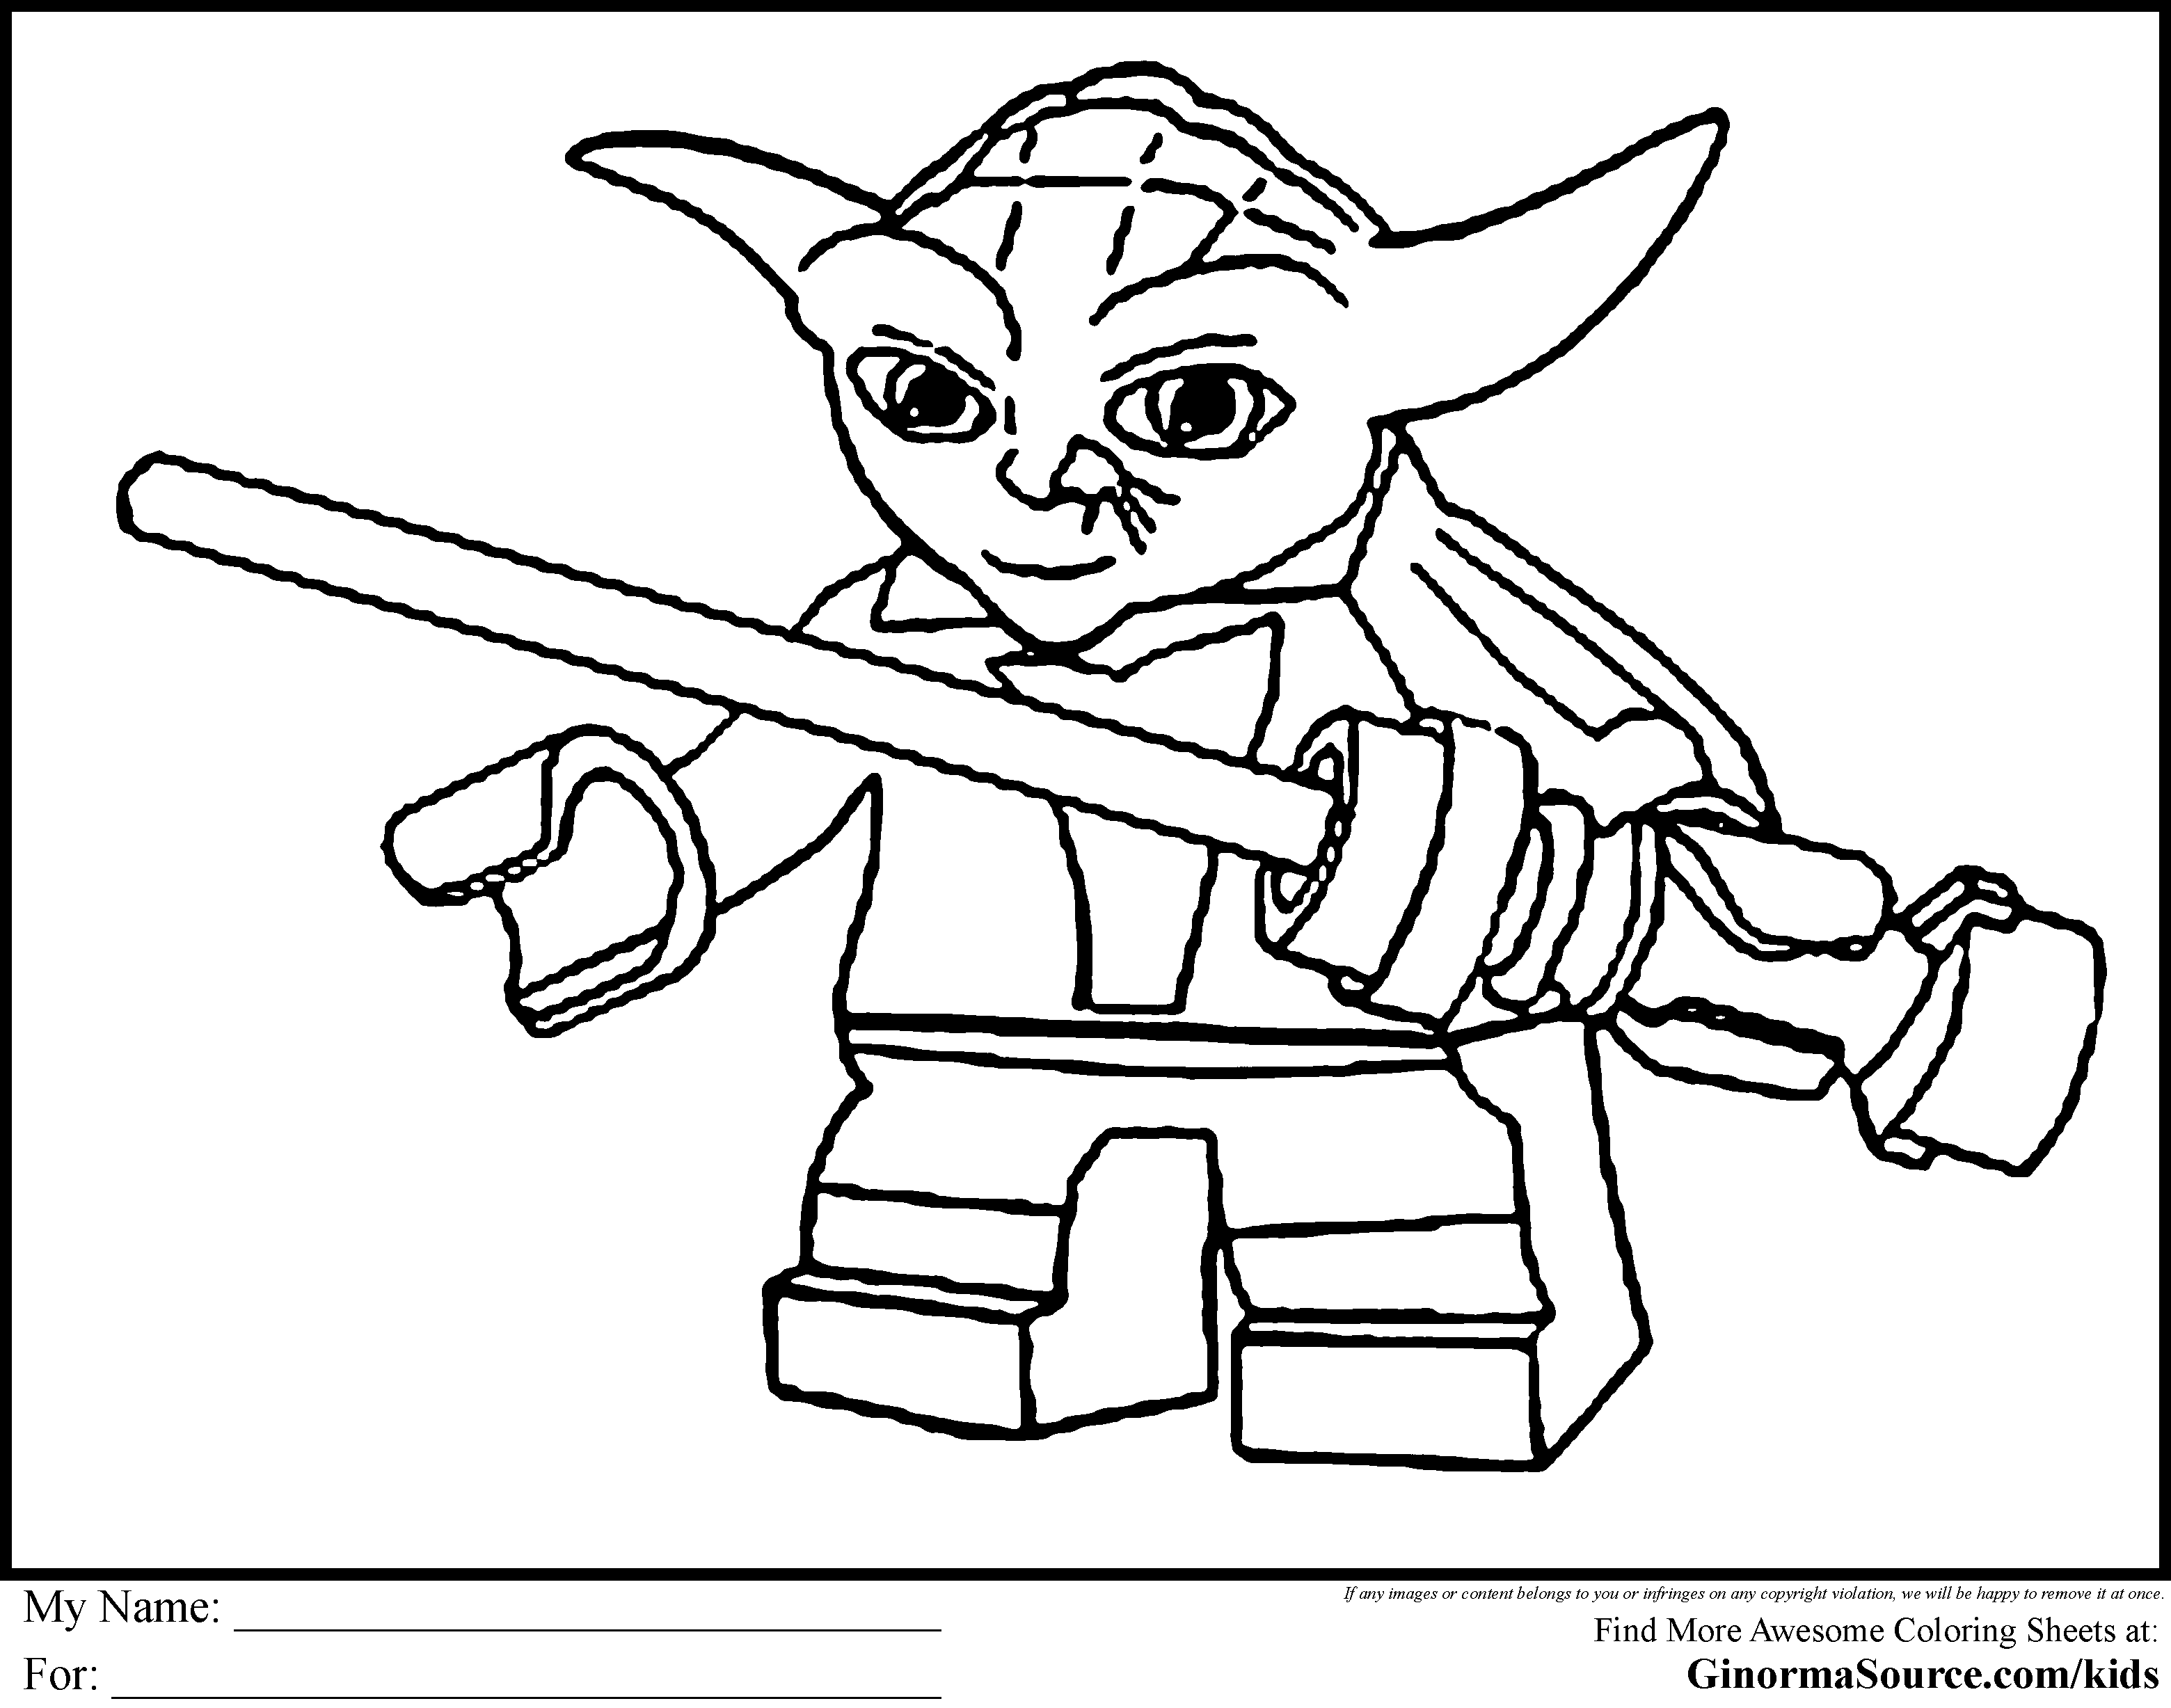 lego star wars coloring sheet lego star wars coloring pages to download and print for free wars sheet coloring star lego 